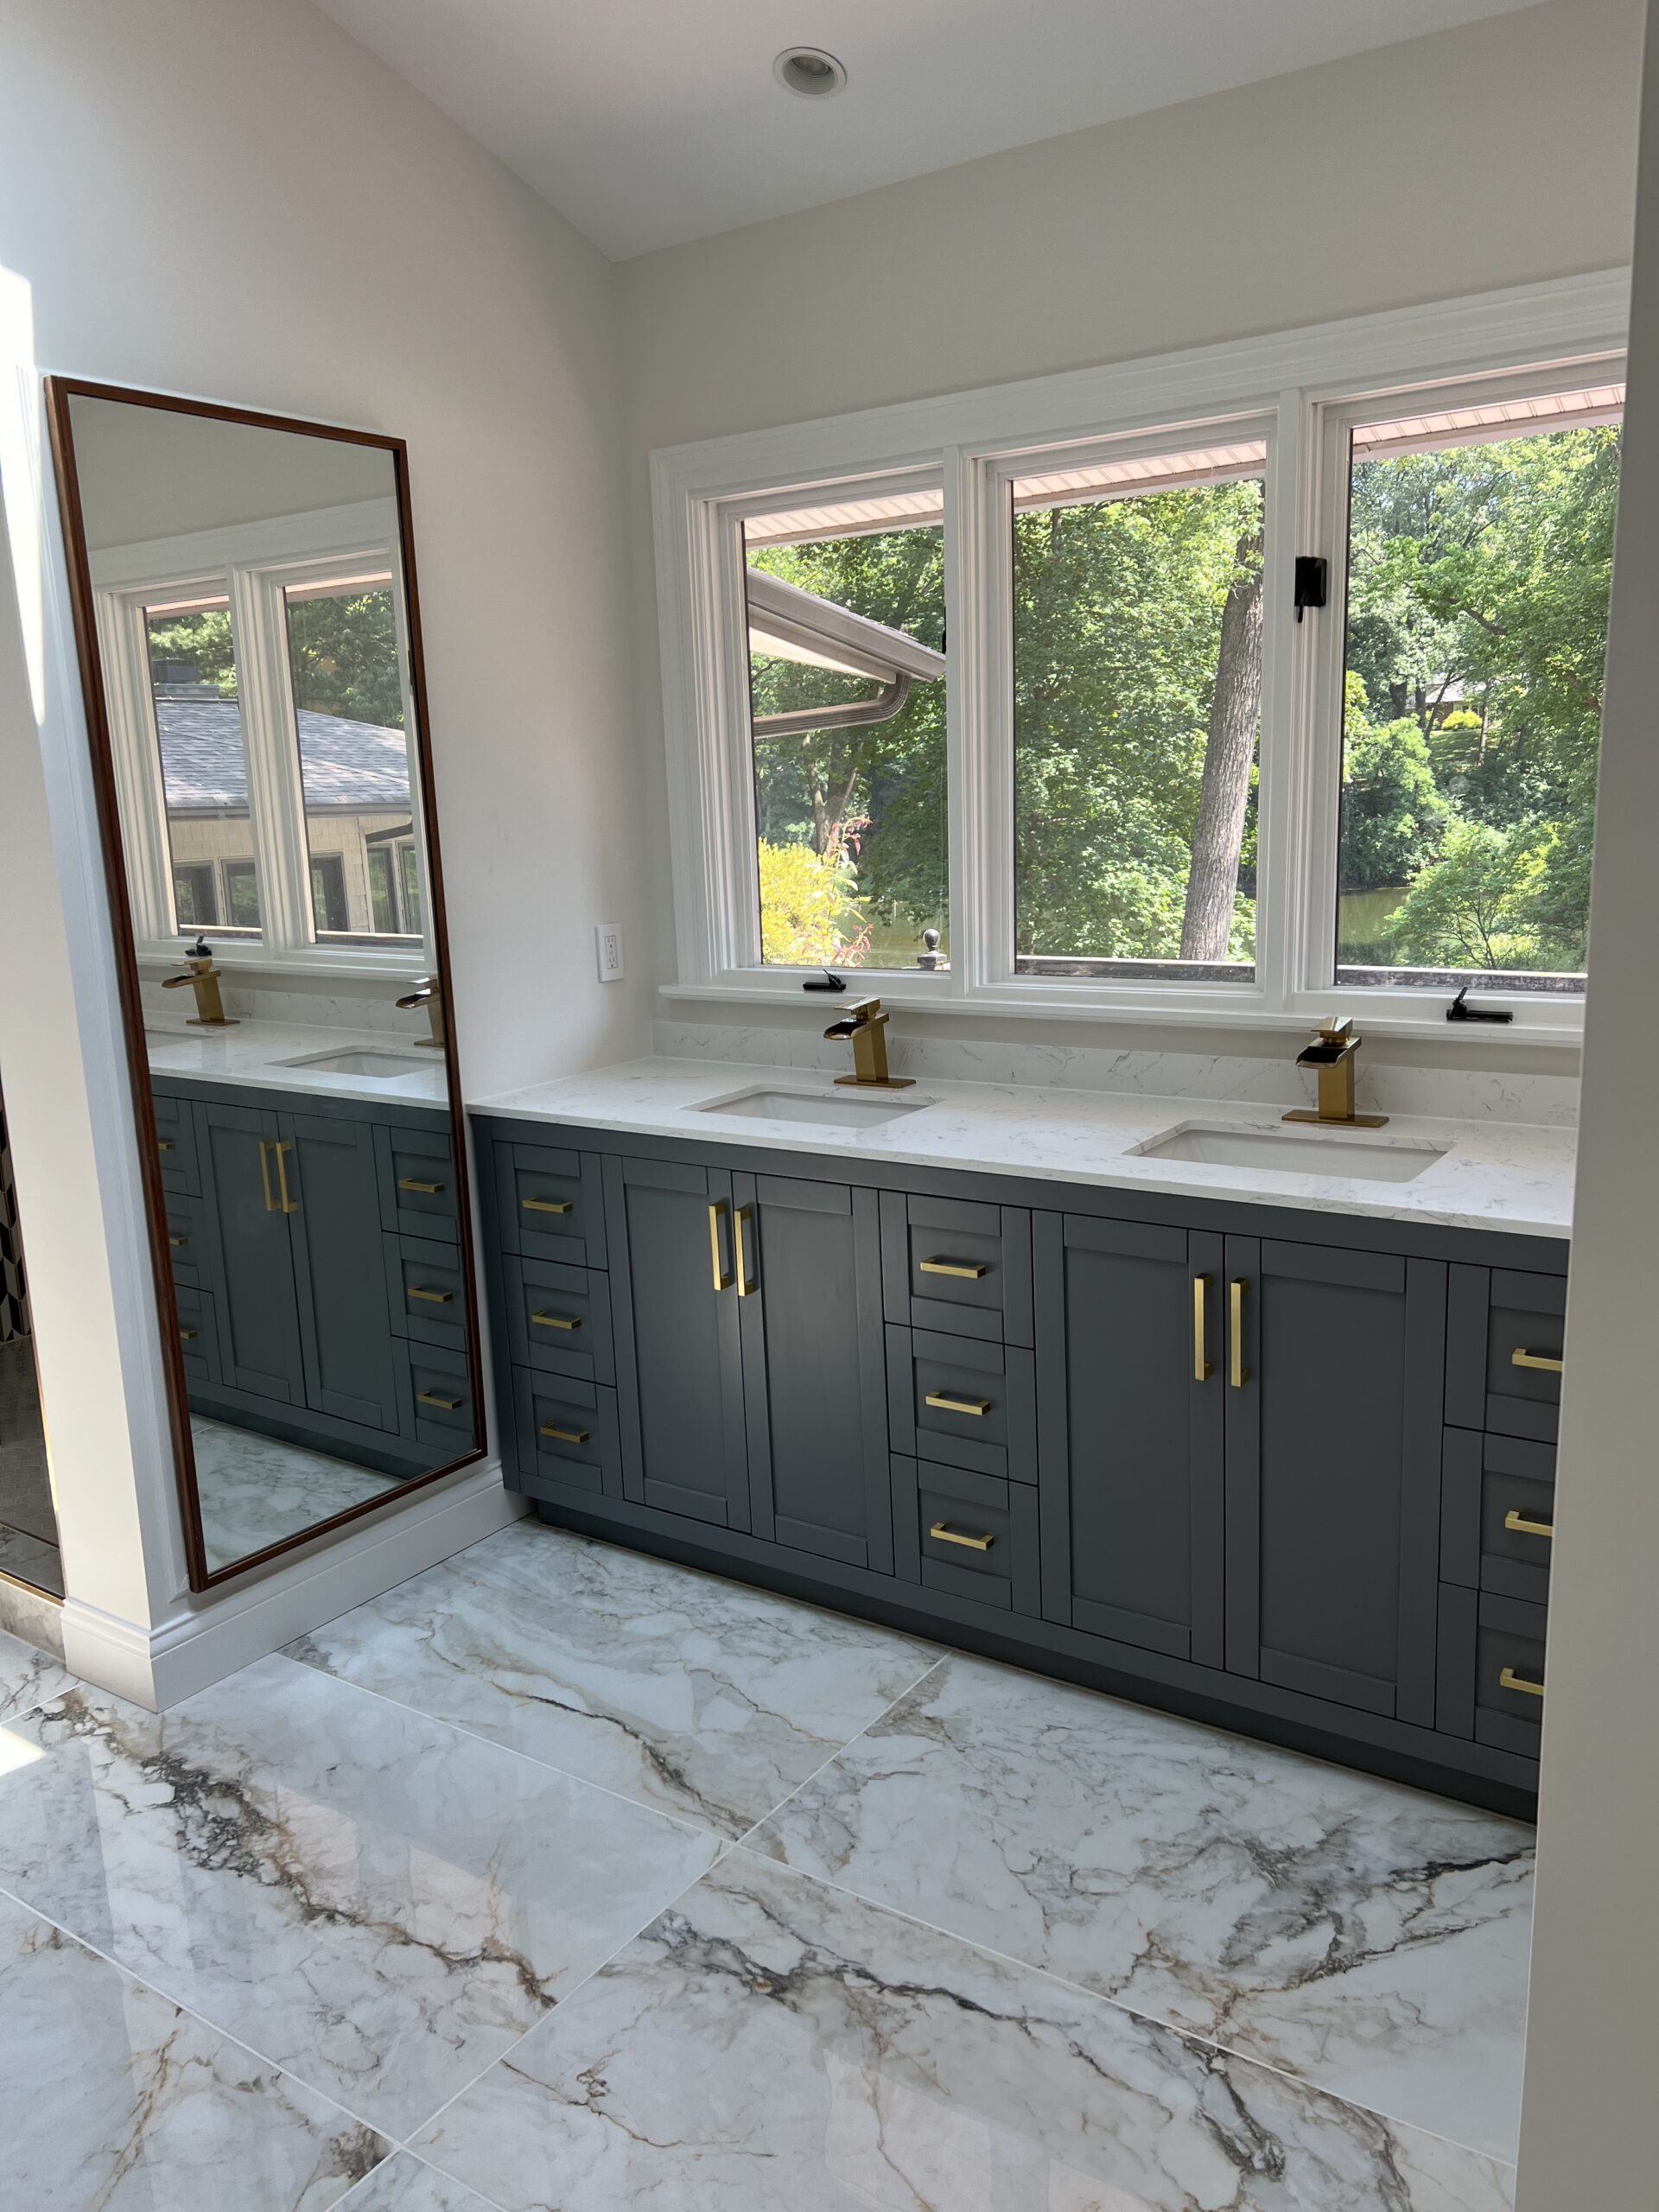 Finished marble sinks with mirror